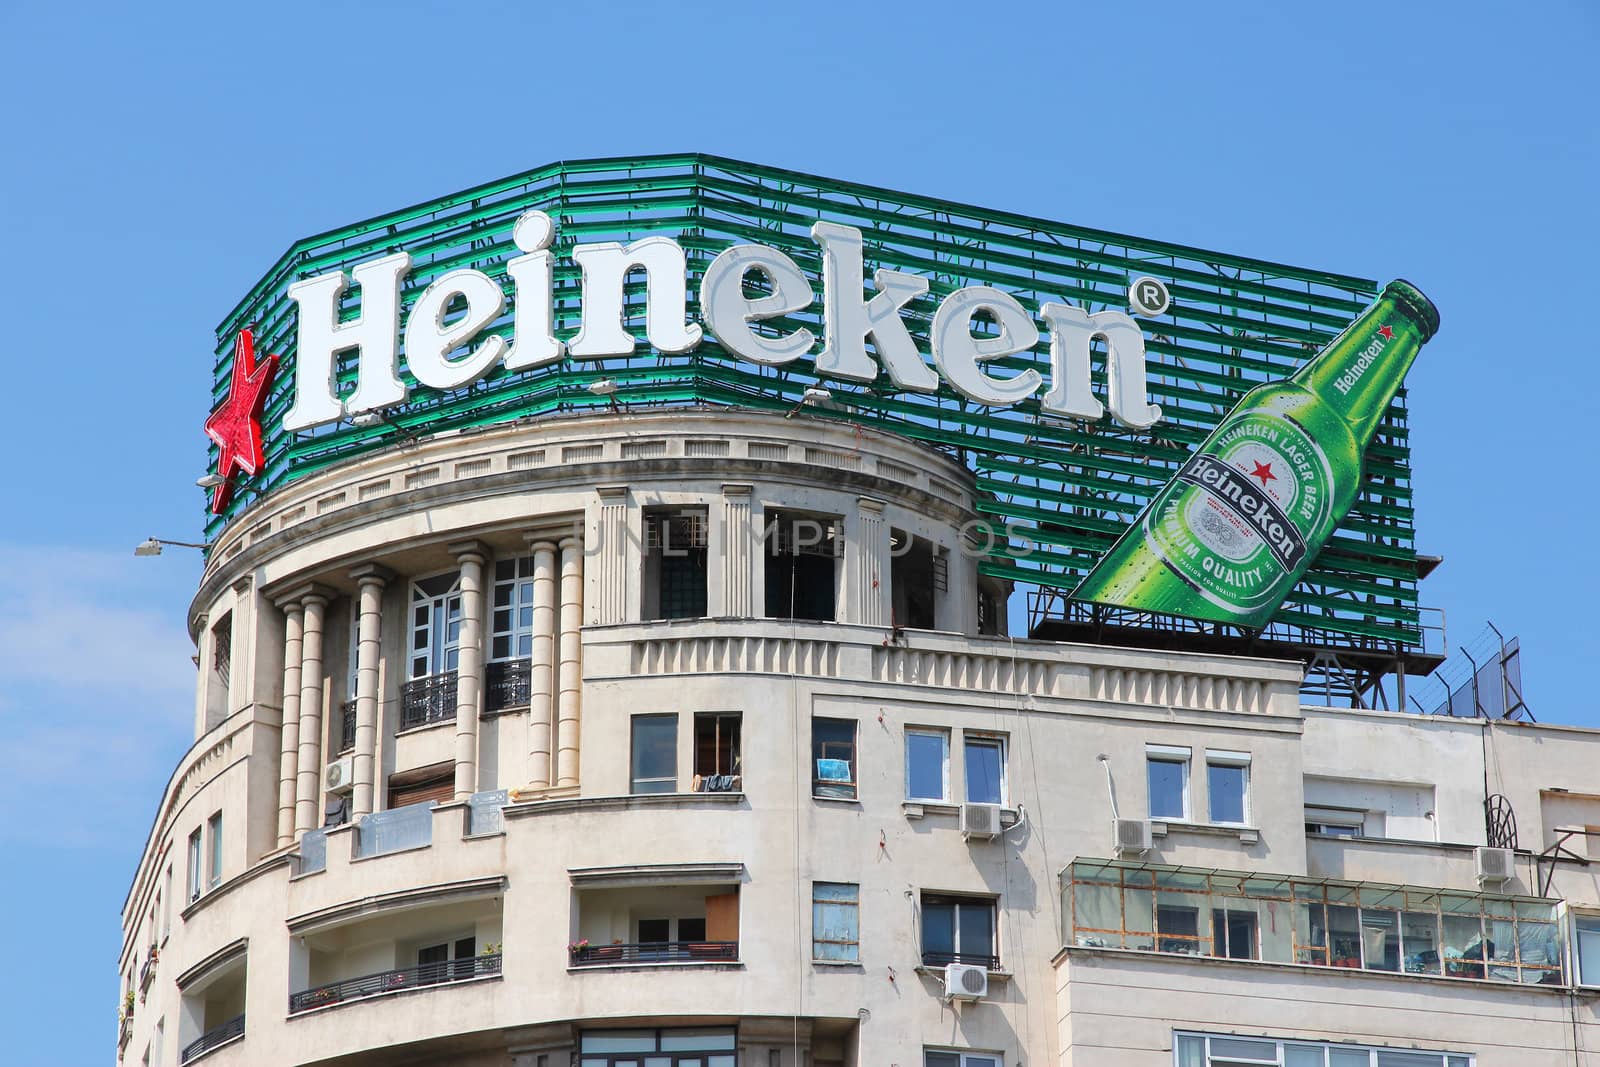 BUCHAREST, ROMANIA - AUGUST 19: Heineken ad on August 19, 2012 on a building in Bucharest, Romania. With 139.2 million hectolitres of beer annually, Heineken is the 3rd largest beer producer worldwide.